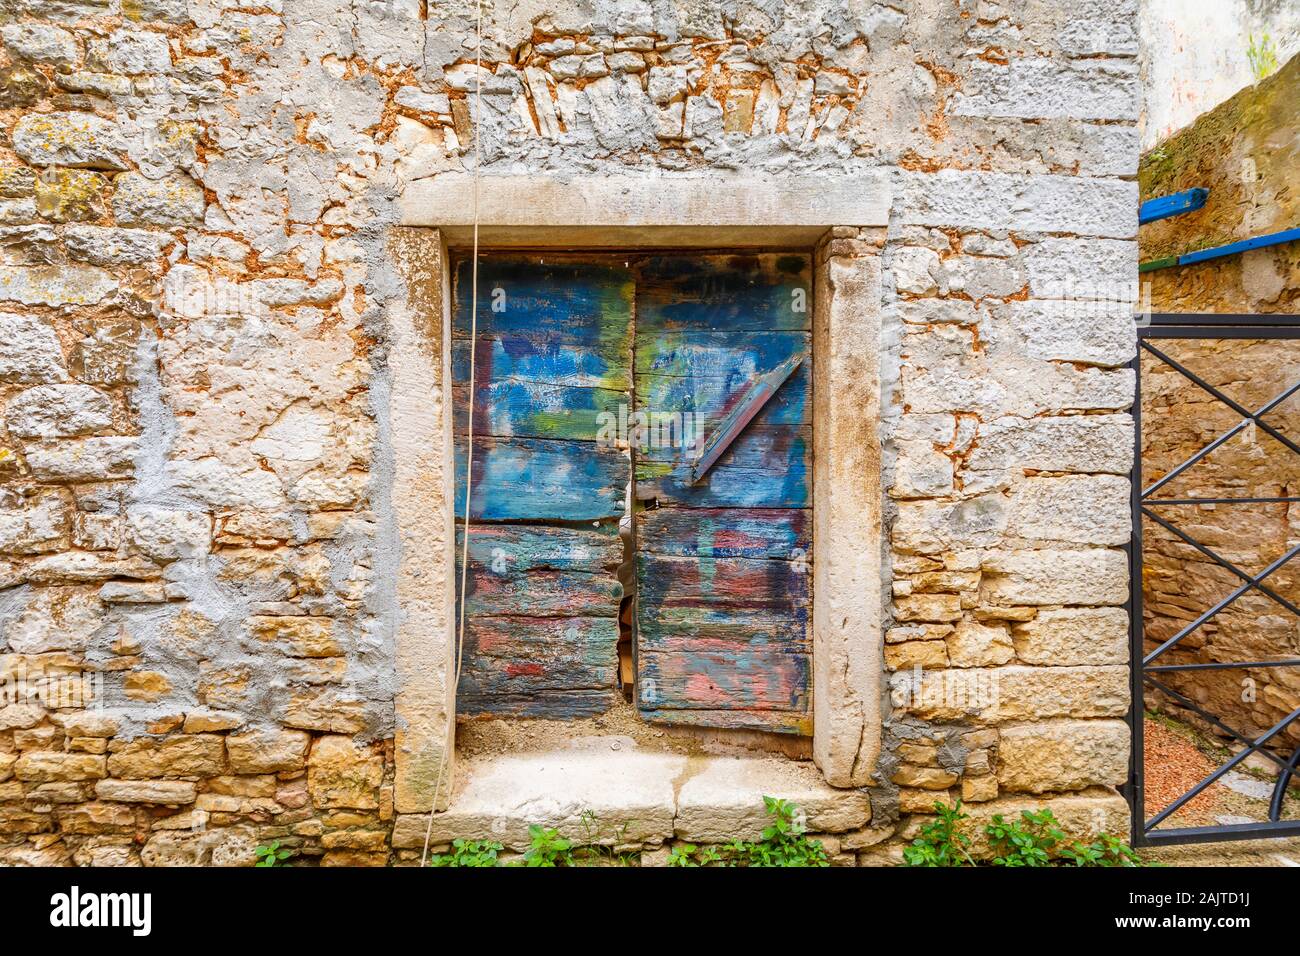 Colourful wooden doors in a doorway in a stone wall in the historic old town area in Bale, a small hill town on Mont Perin in Istria County, Croatia Stock Photo